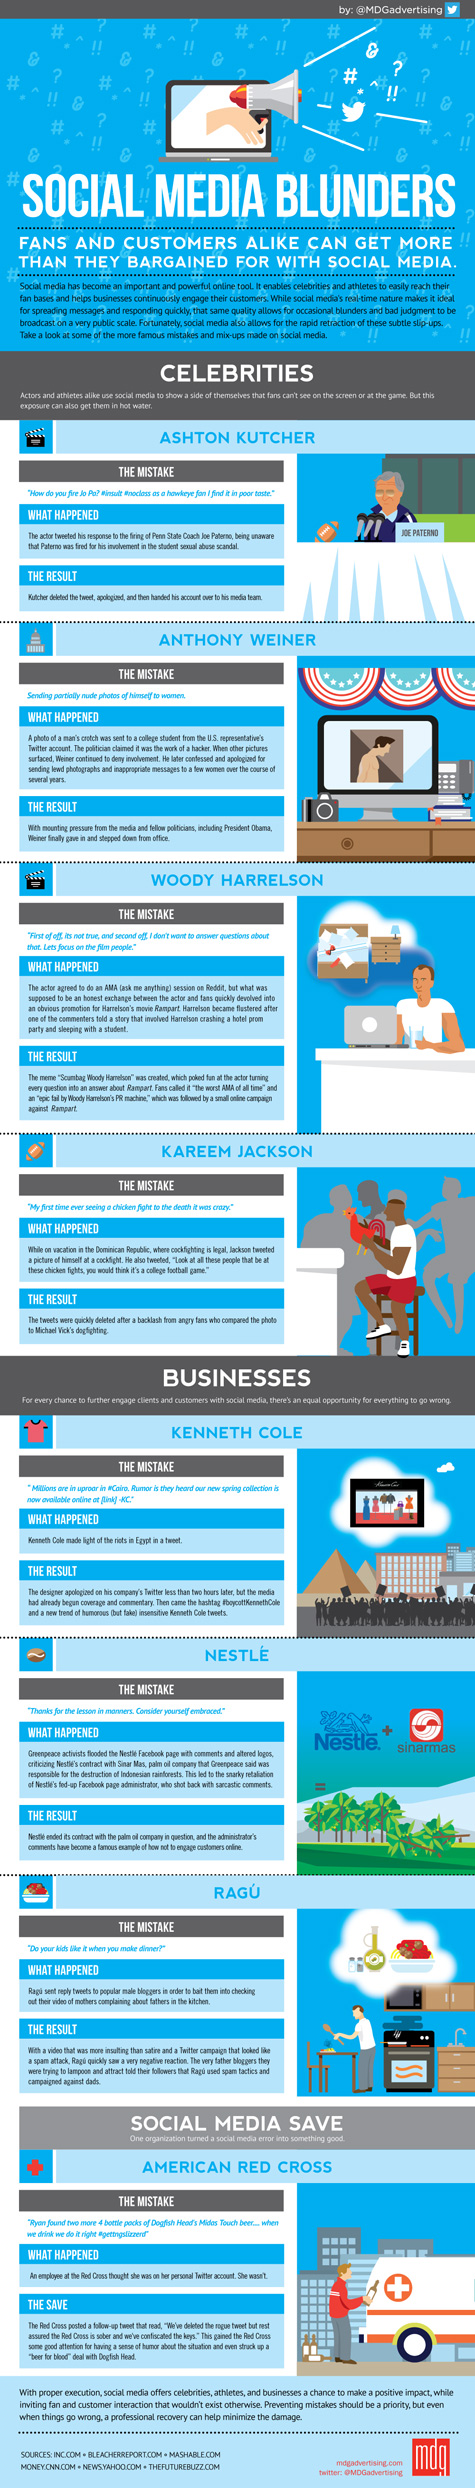 social media blunders infographic 475